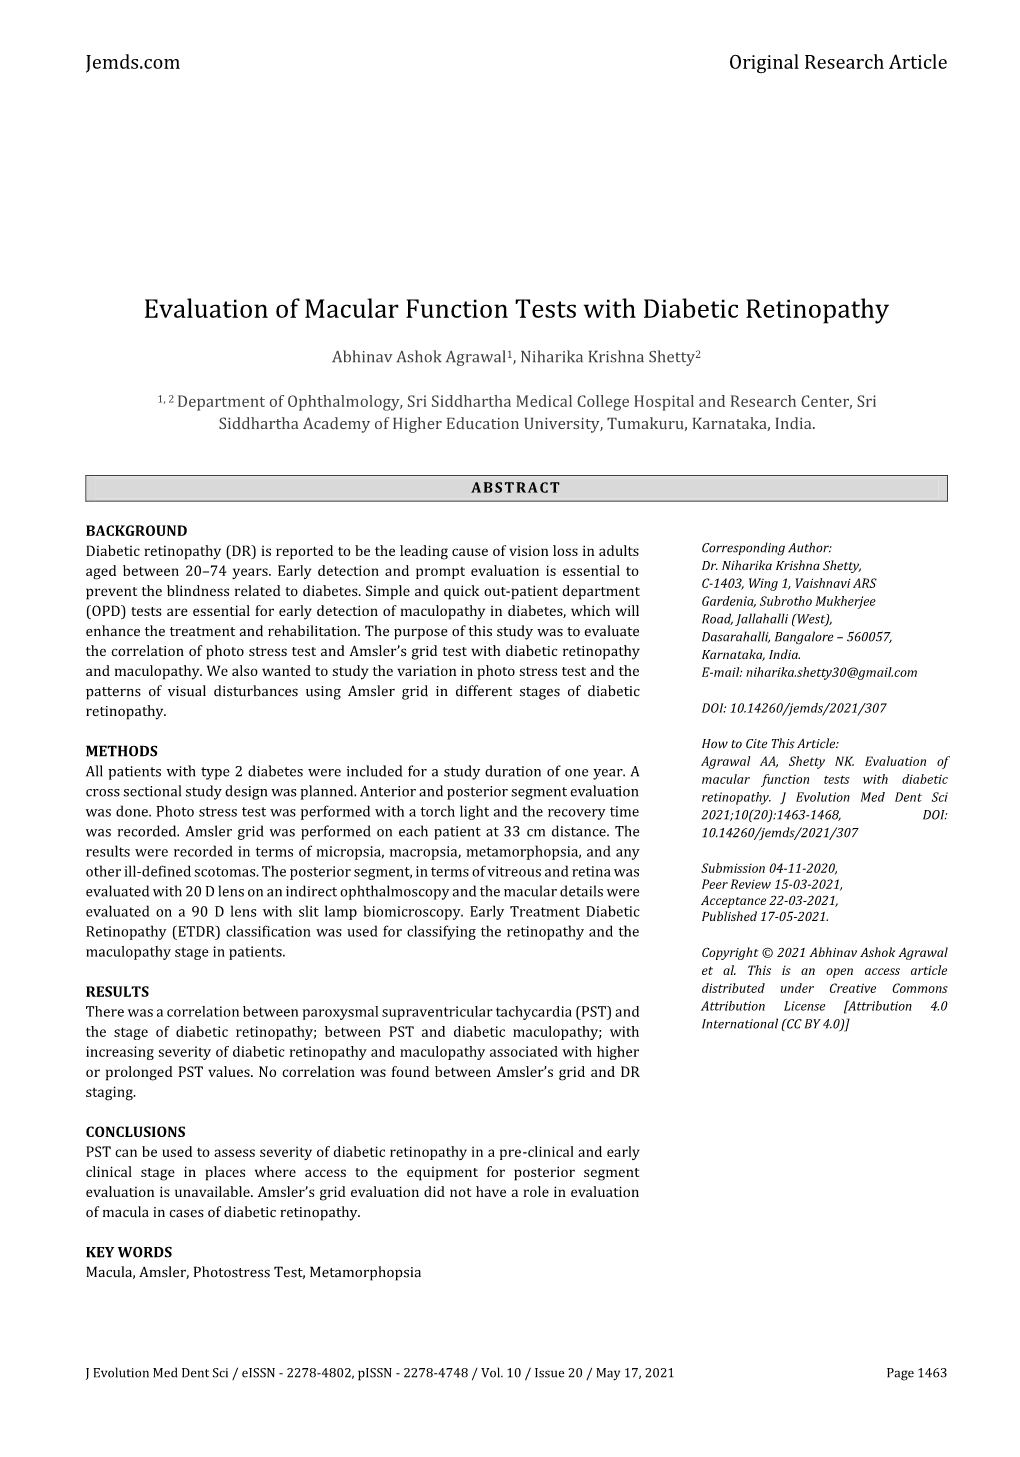 Evaluation of Macular Function Tests with Diabetic Retinopathy